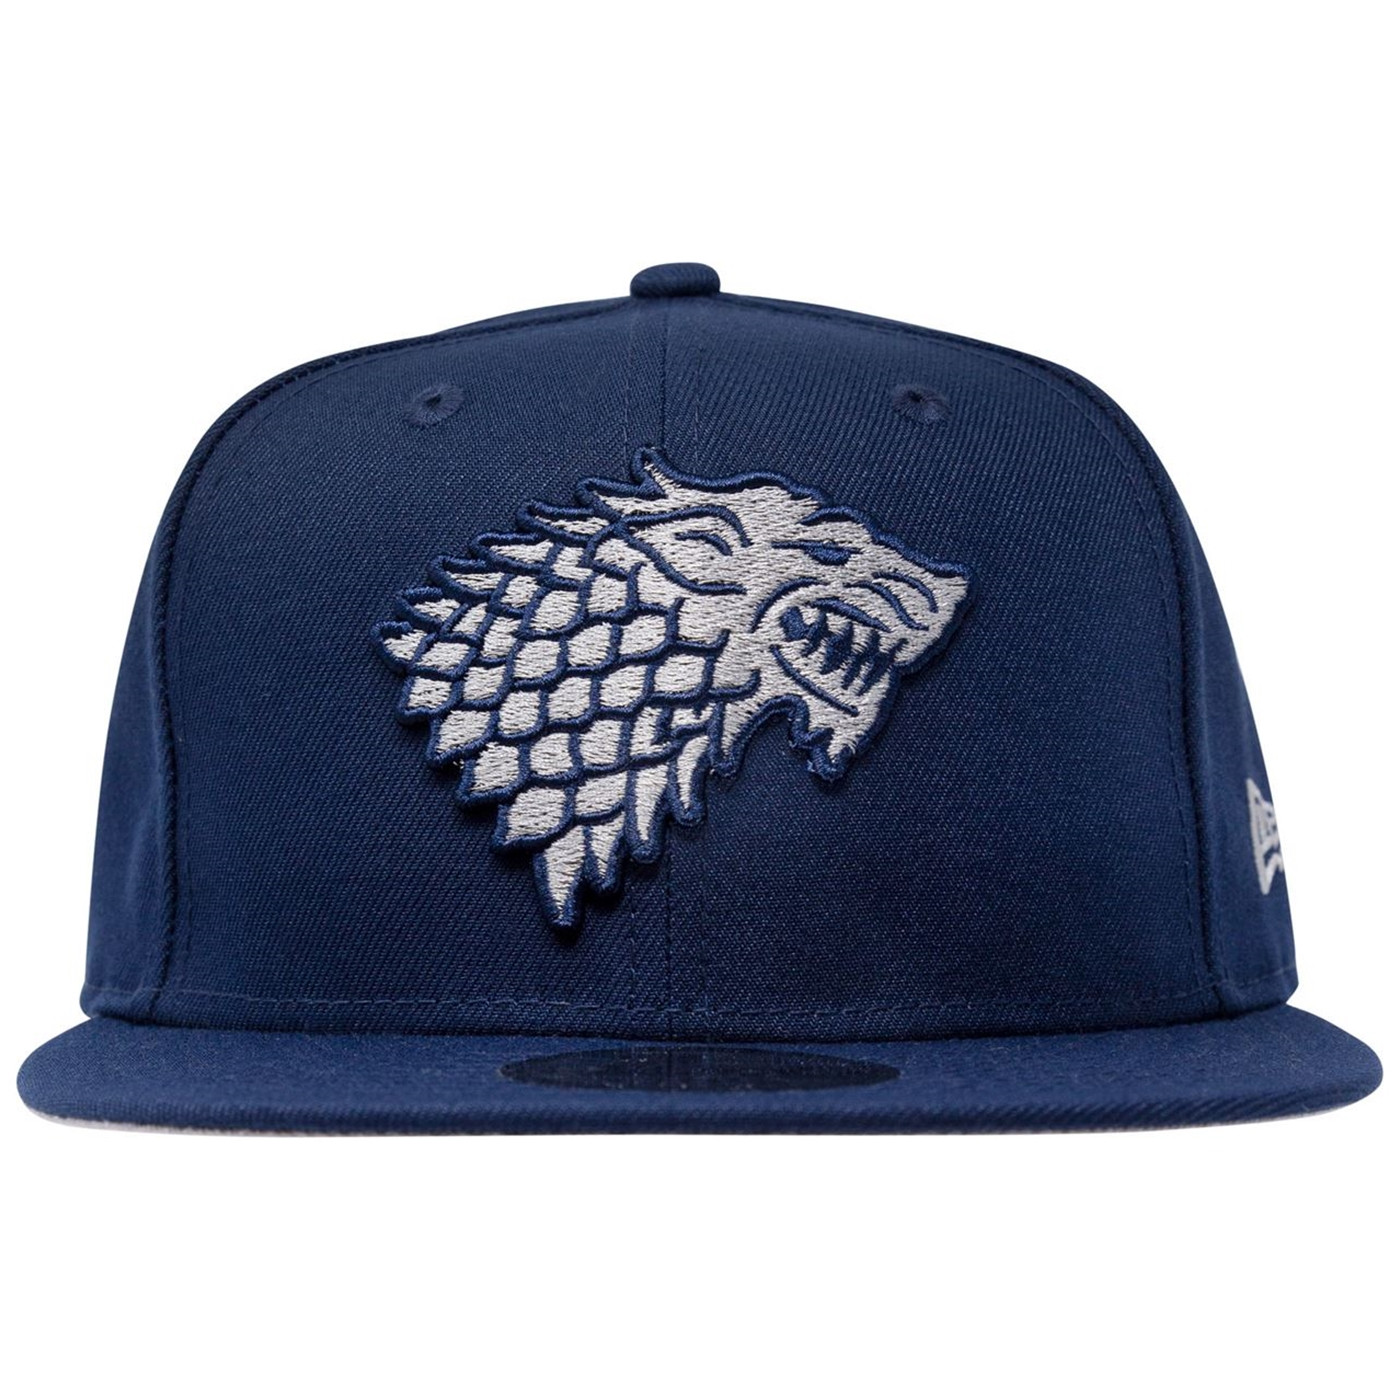 Game of Thrones House Stark 9Fifty Adjustable New Era Hat